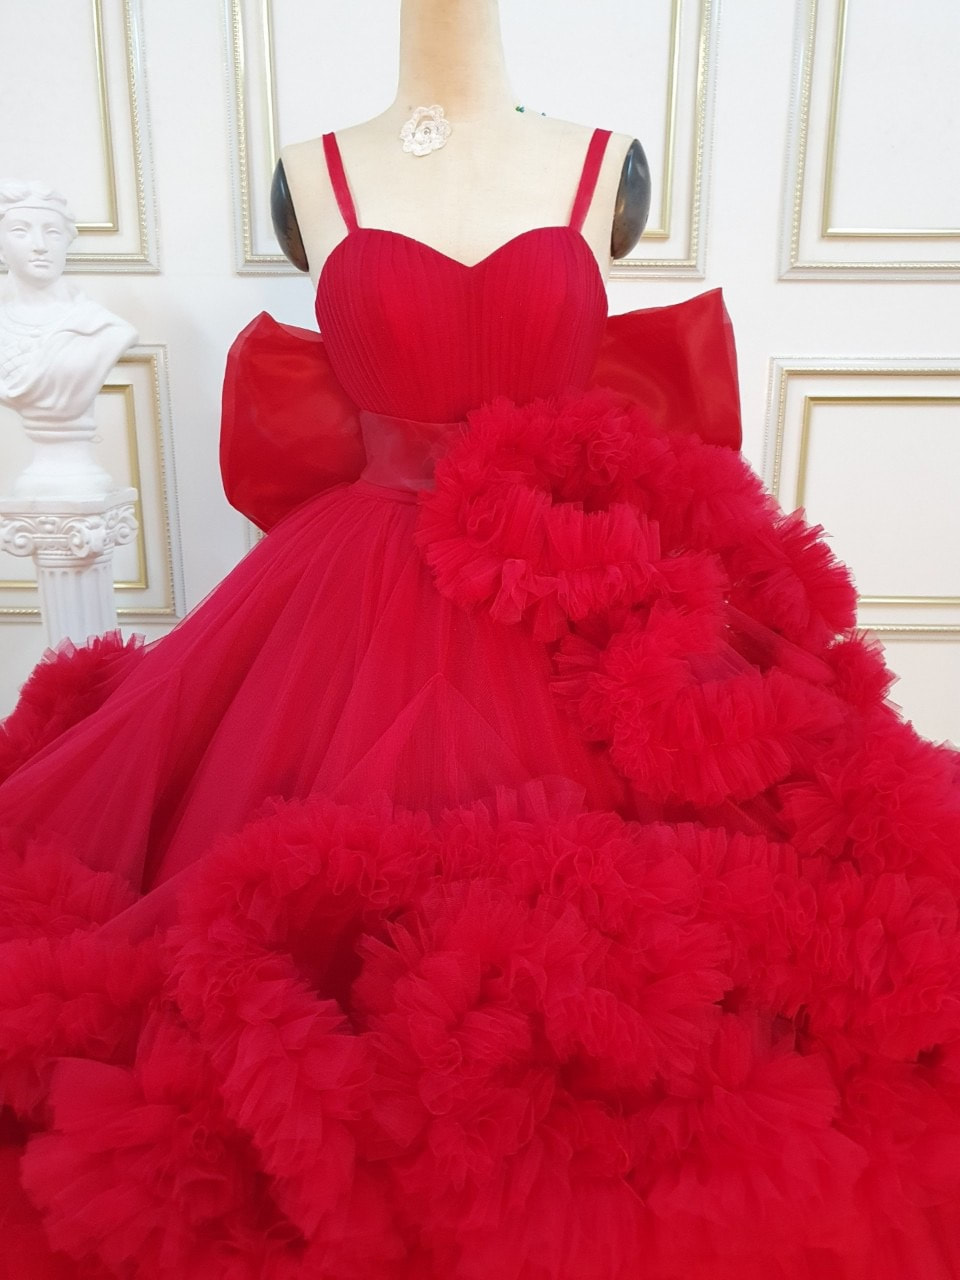 Cute Ruffled Tiered Red Tulle High-low Christmas Party Dress - VQ